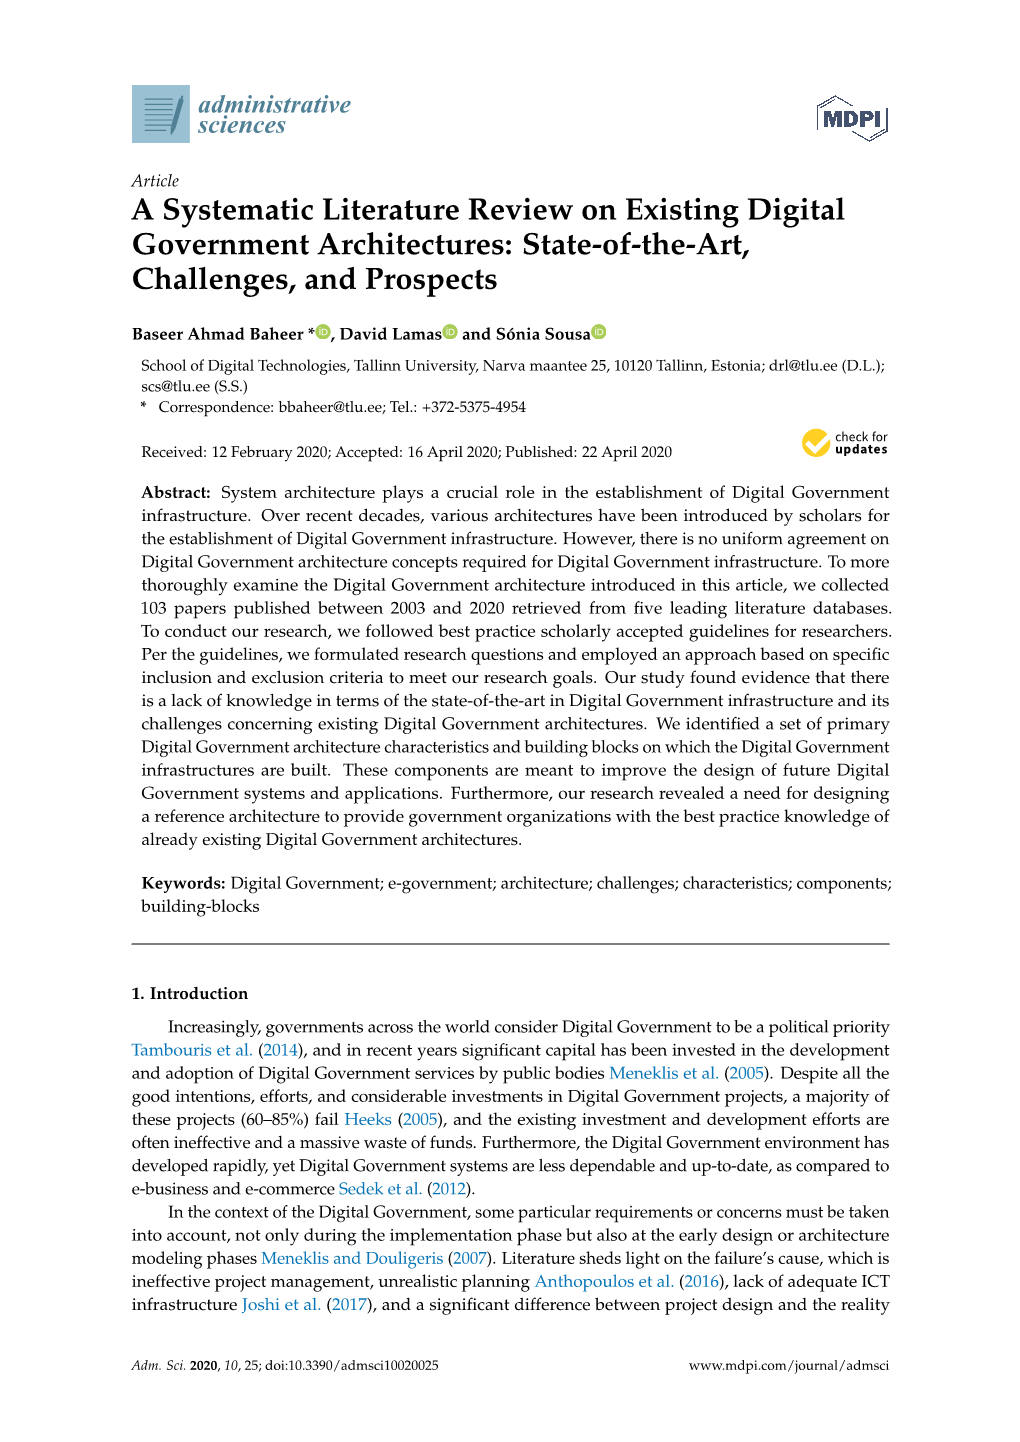 A Systematic Literature Review on Existing Digital Government Architectures: State-Of-The-Art, Challenges, and Prospects